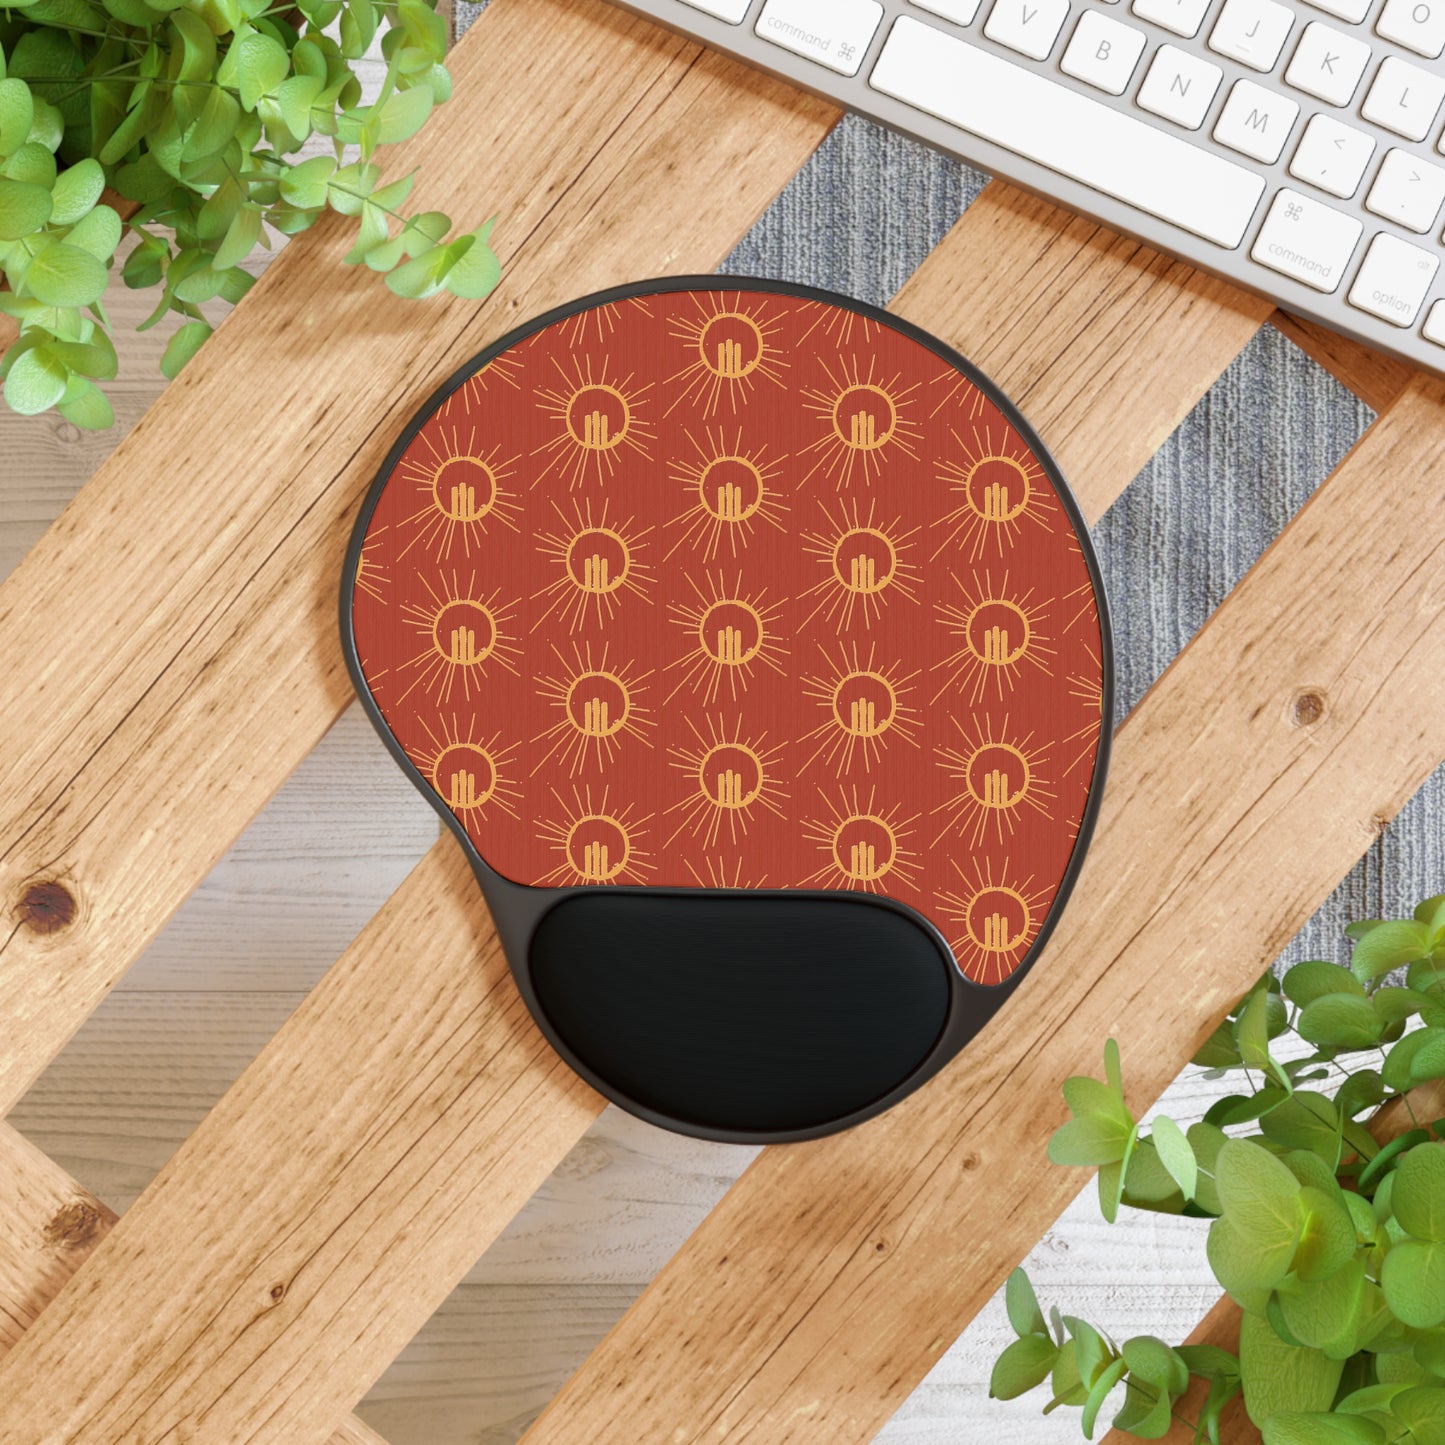 Mouse Pad - A Sunny Day Logo Mouse Pad